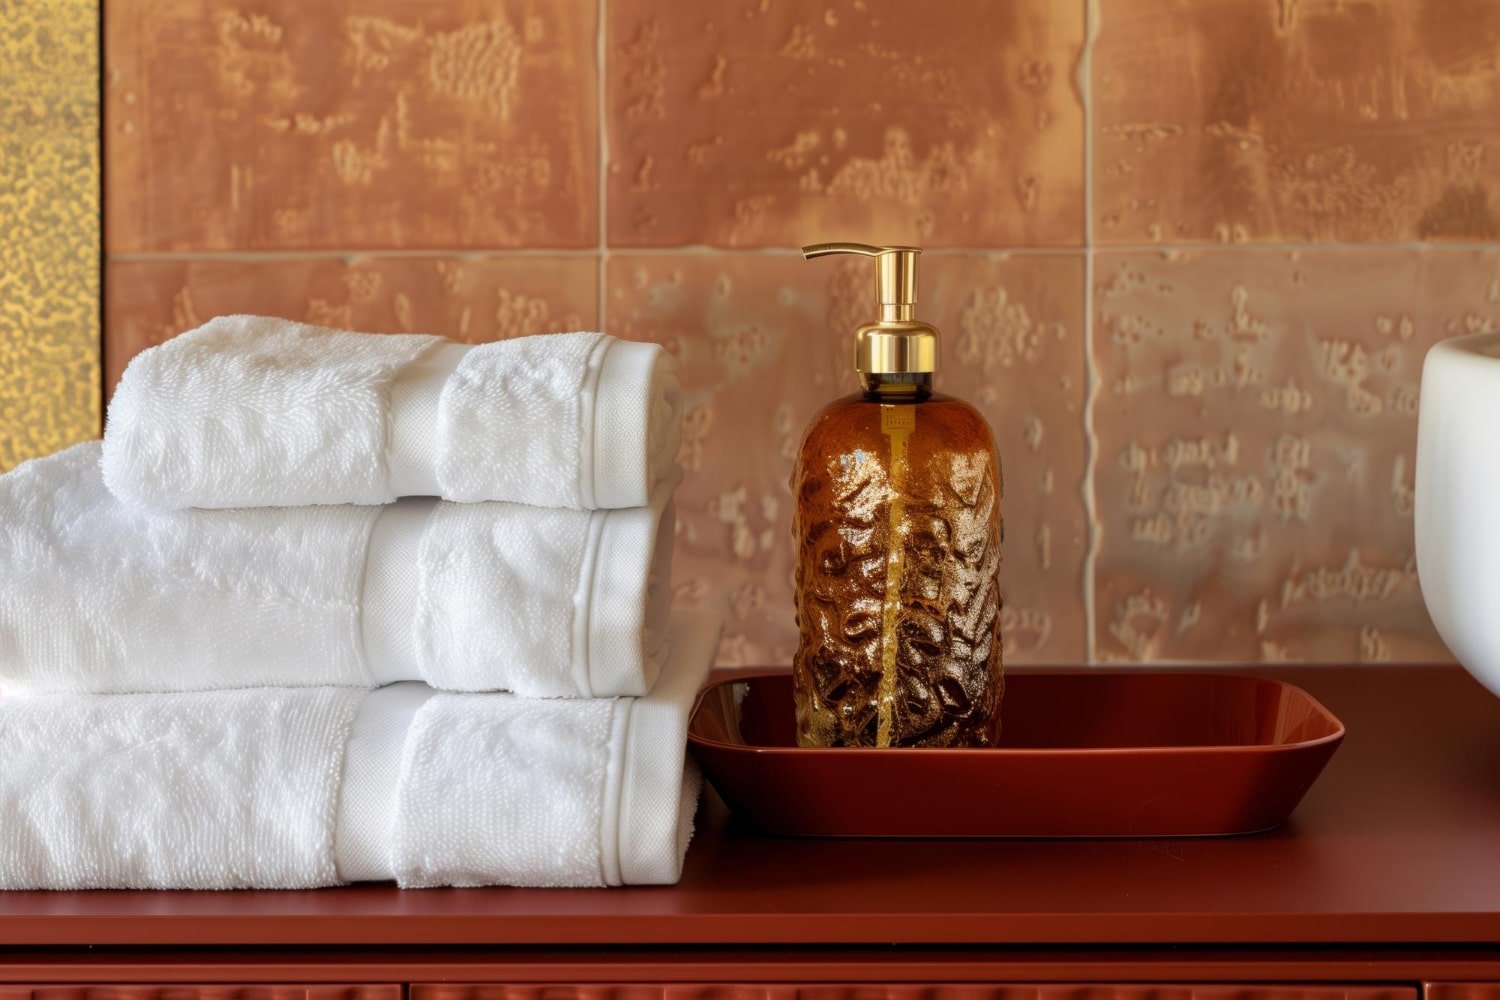 Decorate Elegantly With Kassatex’s Luxury Bath Linens And Home Accessories